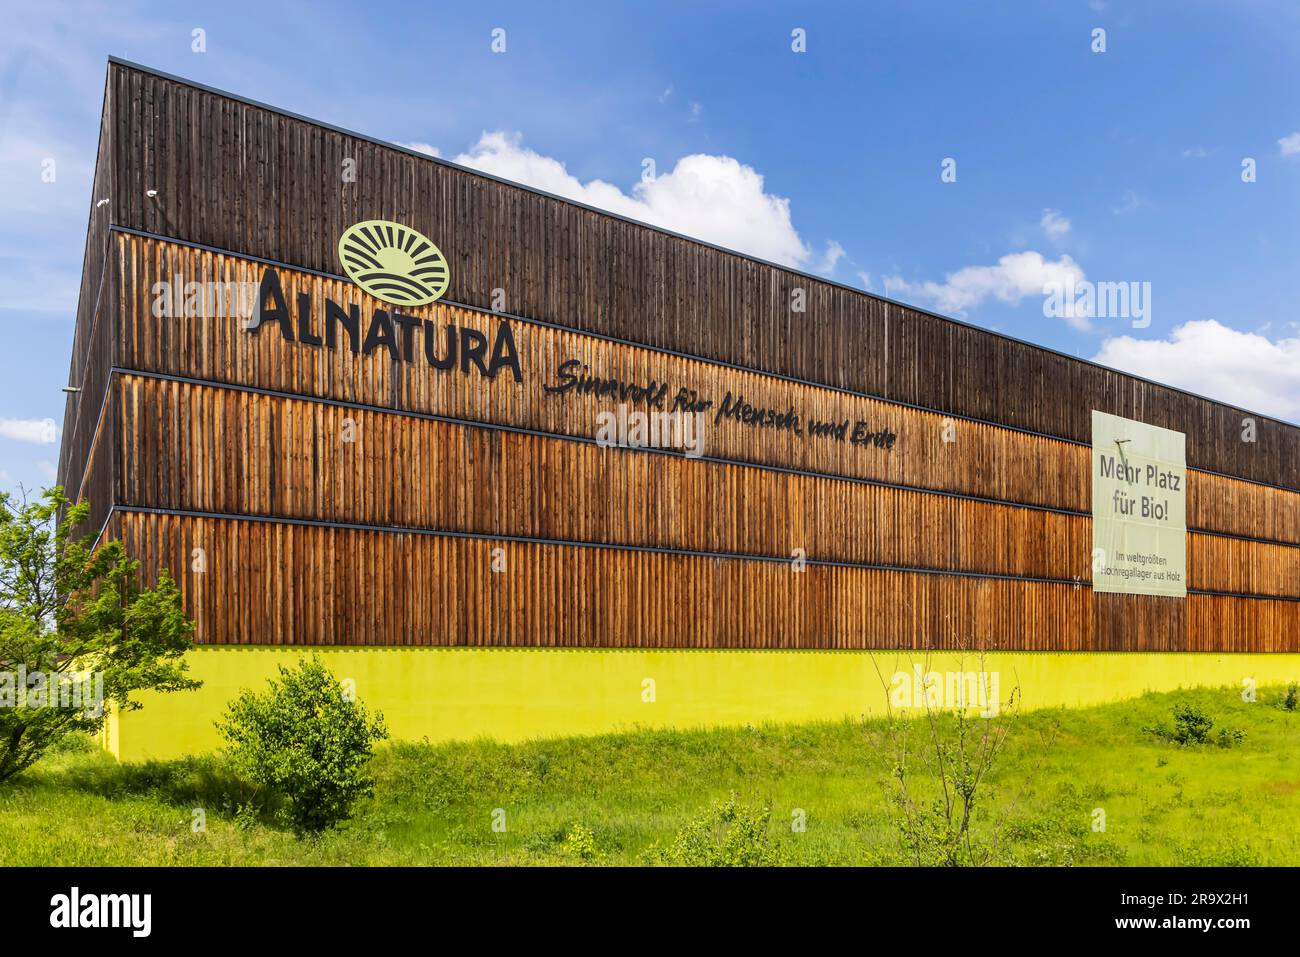 Alnatura distribution centre, logistics centre, the world's largest high-bay warehouse made of wood, architecture in timber construction, Lorsch Stock Photo